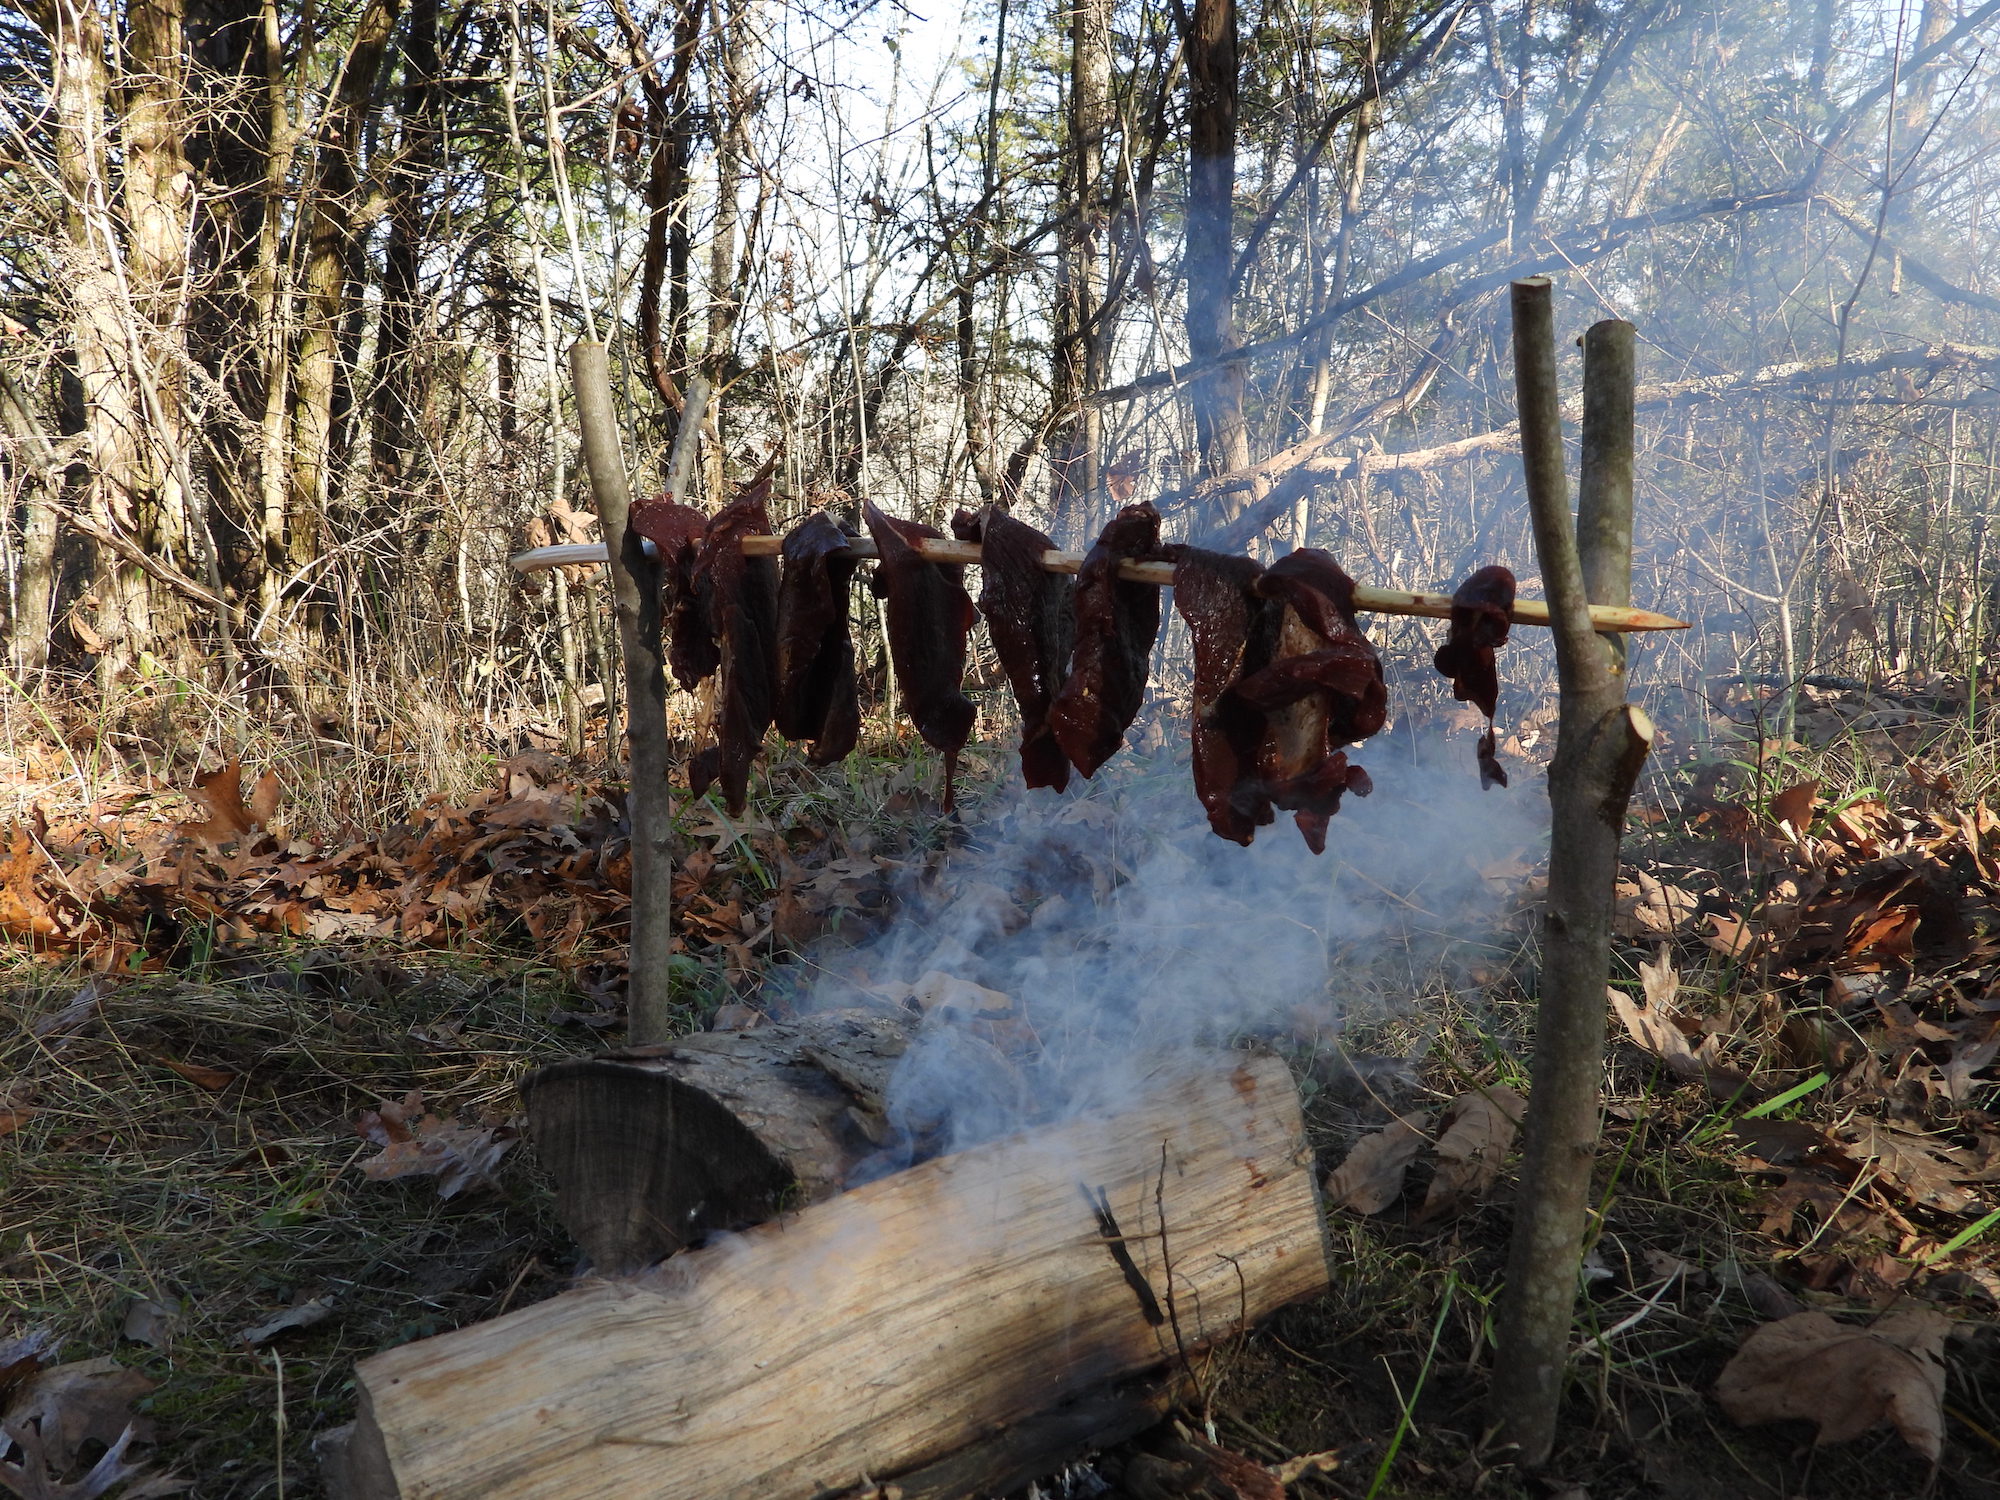 Strips of meat smoking over a fire